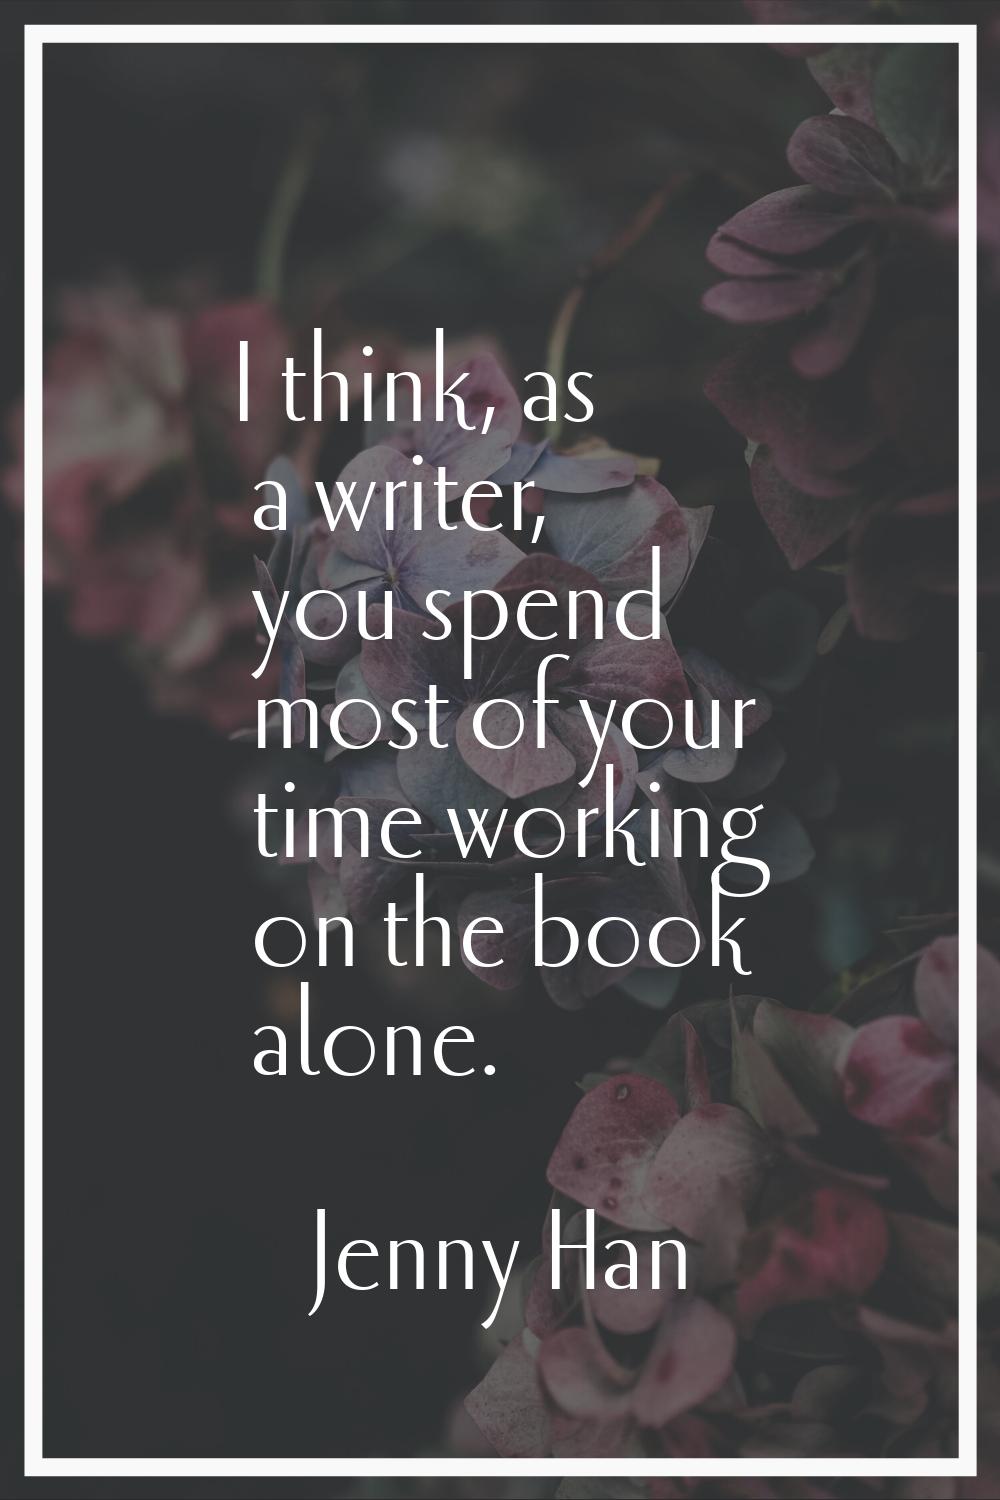 I think, as a writer, you spend most of your time working on the book alone.